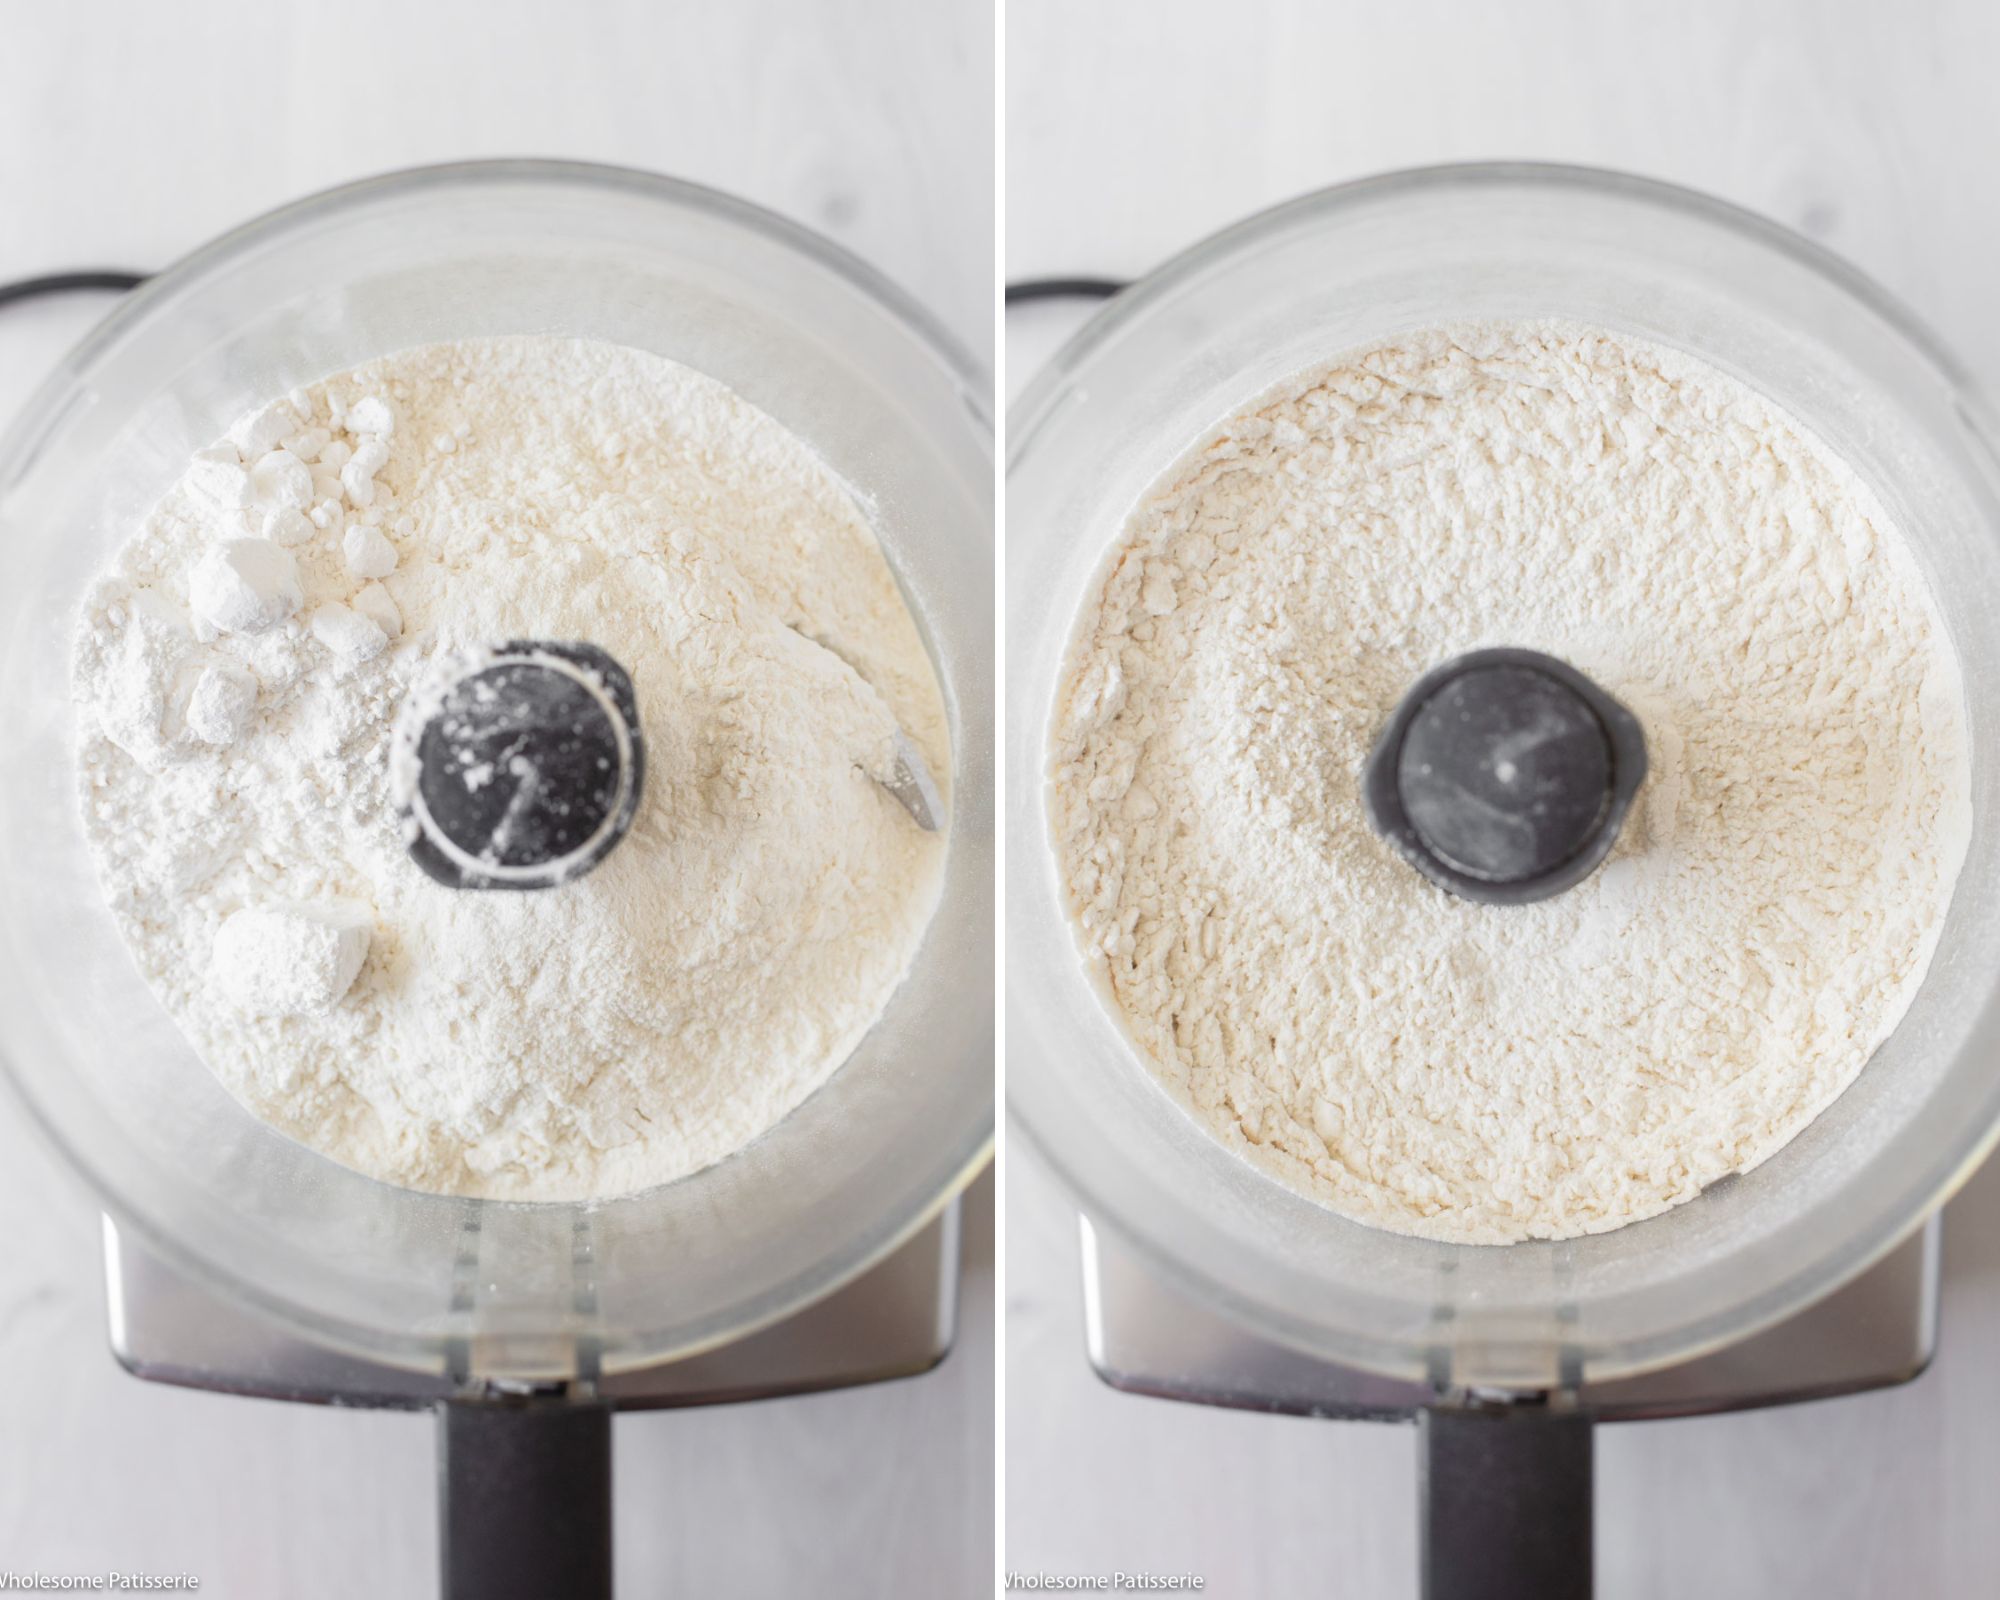 In a food processor pulsing together the flour, baking powder, sugar and salt.